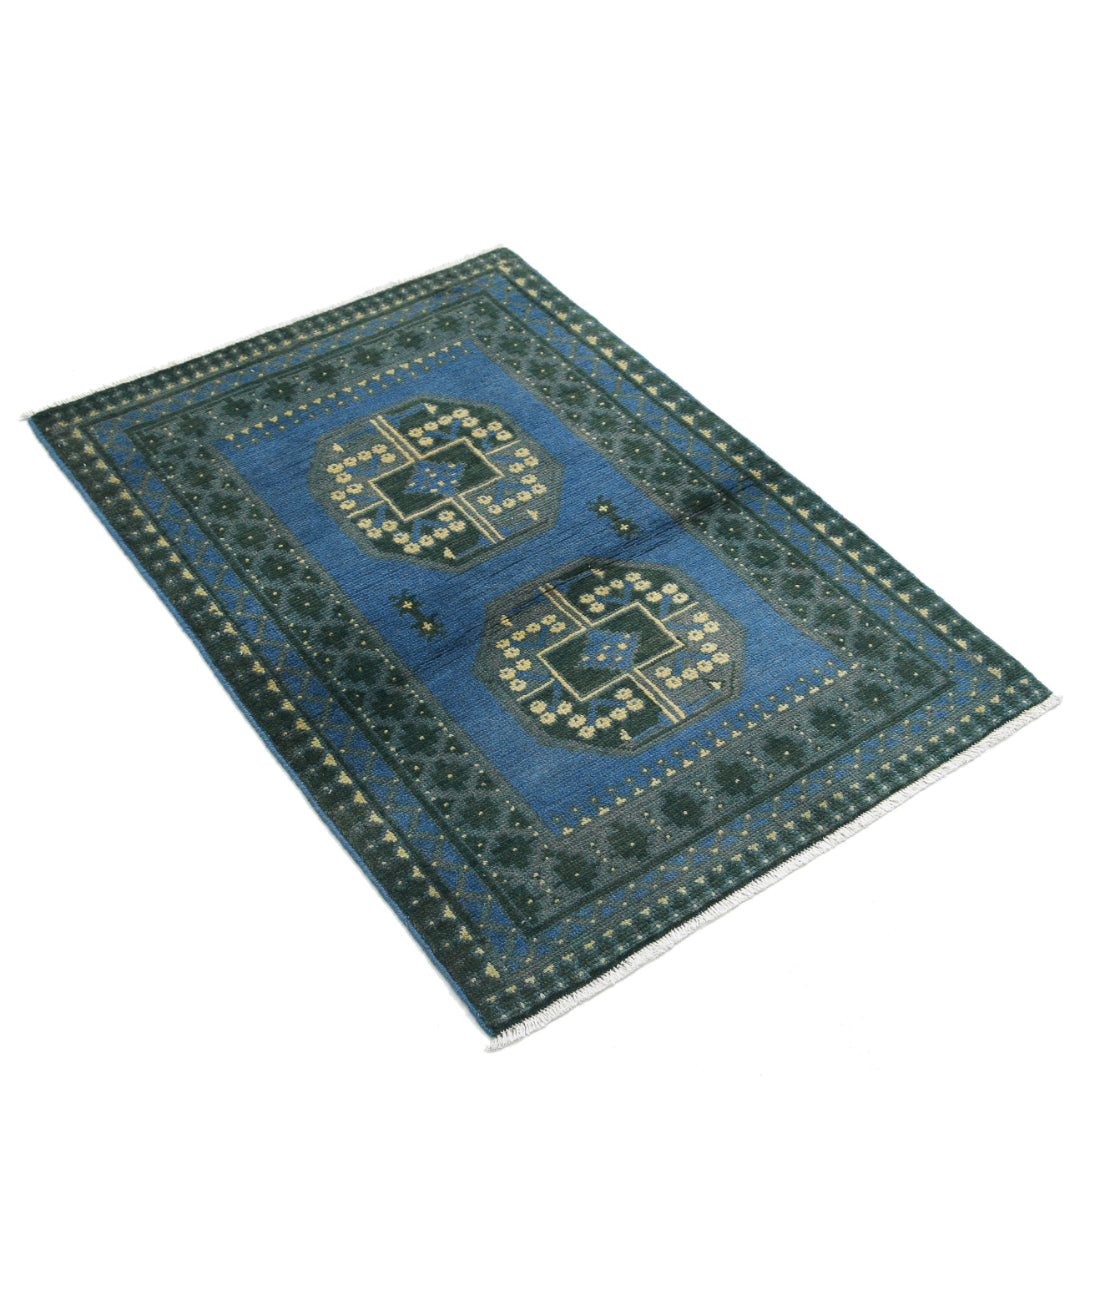 Revival 2'8'' X 3'10'' Hand-Knotted Wool Rug 2'8'' x 3'10'' (80 X 115) / Blue / N/A